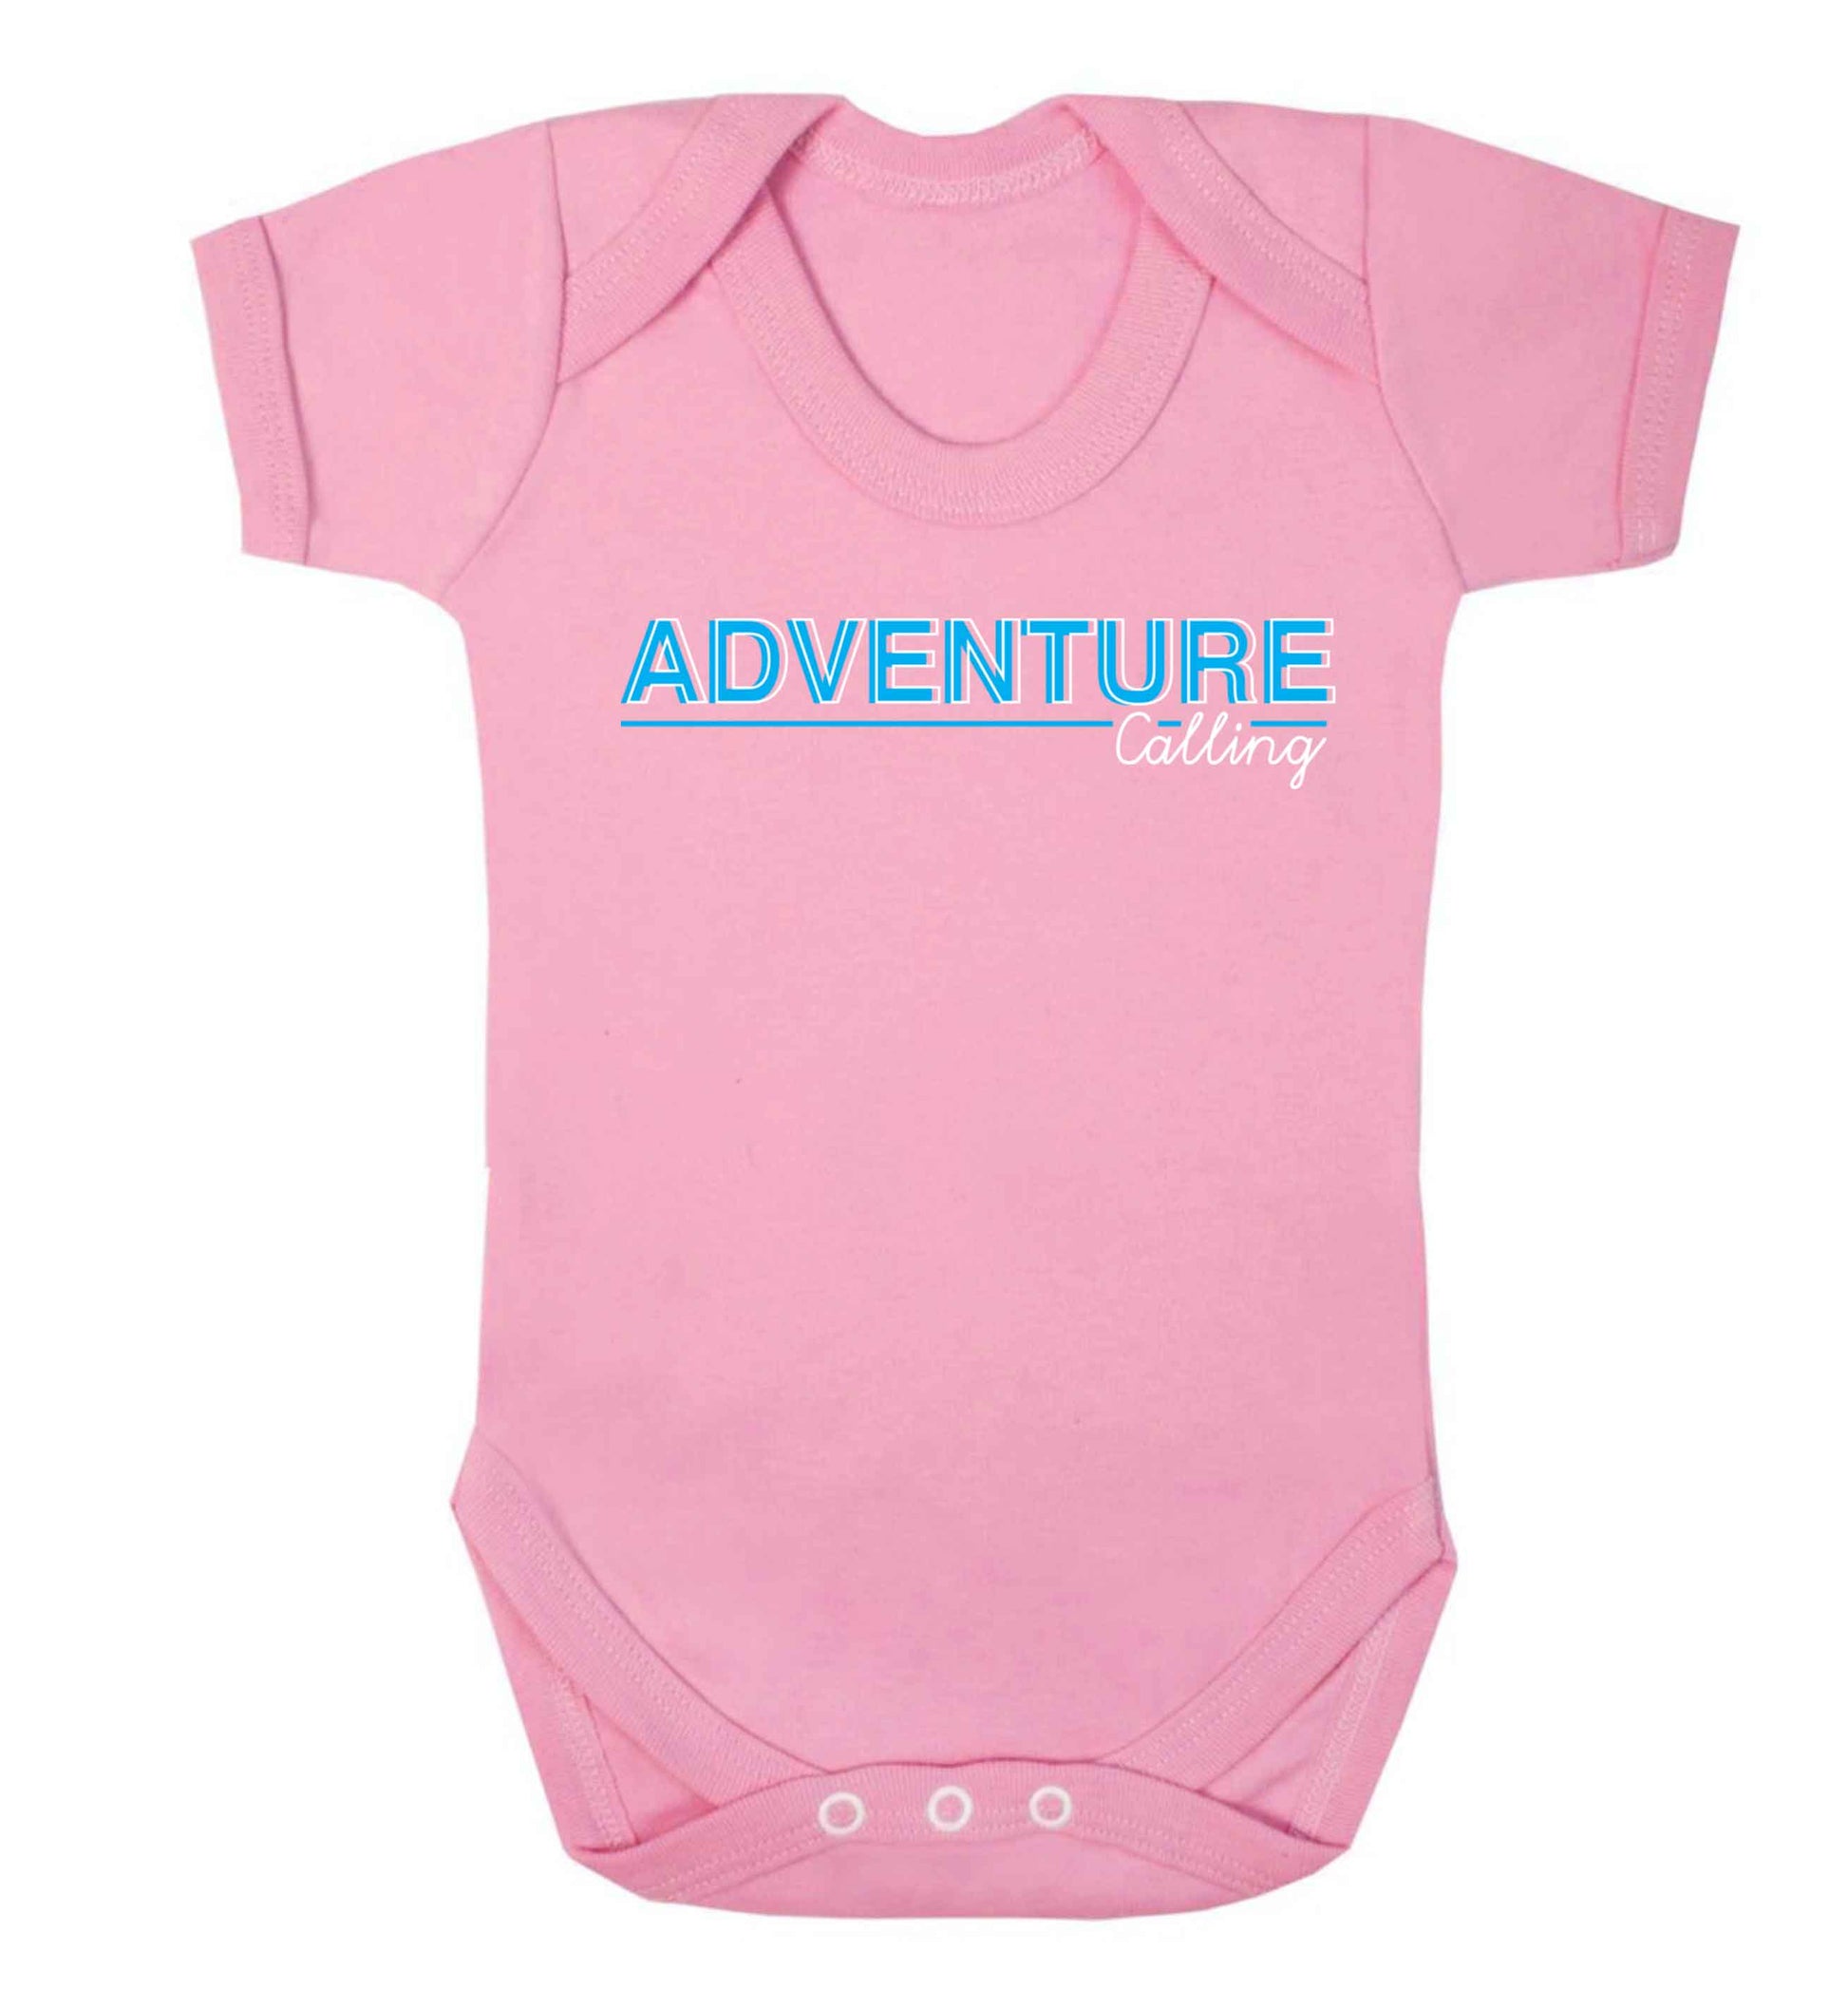 Adventure calling Baby Vest pale pink 18-24 months